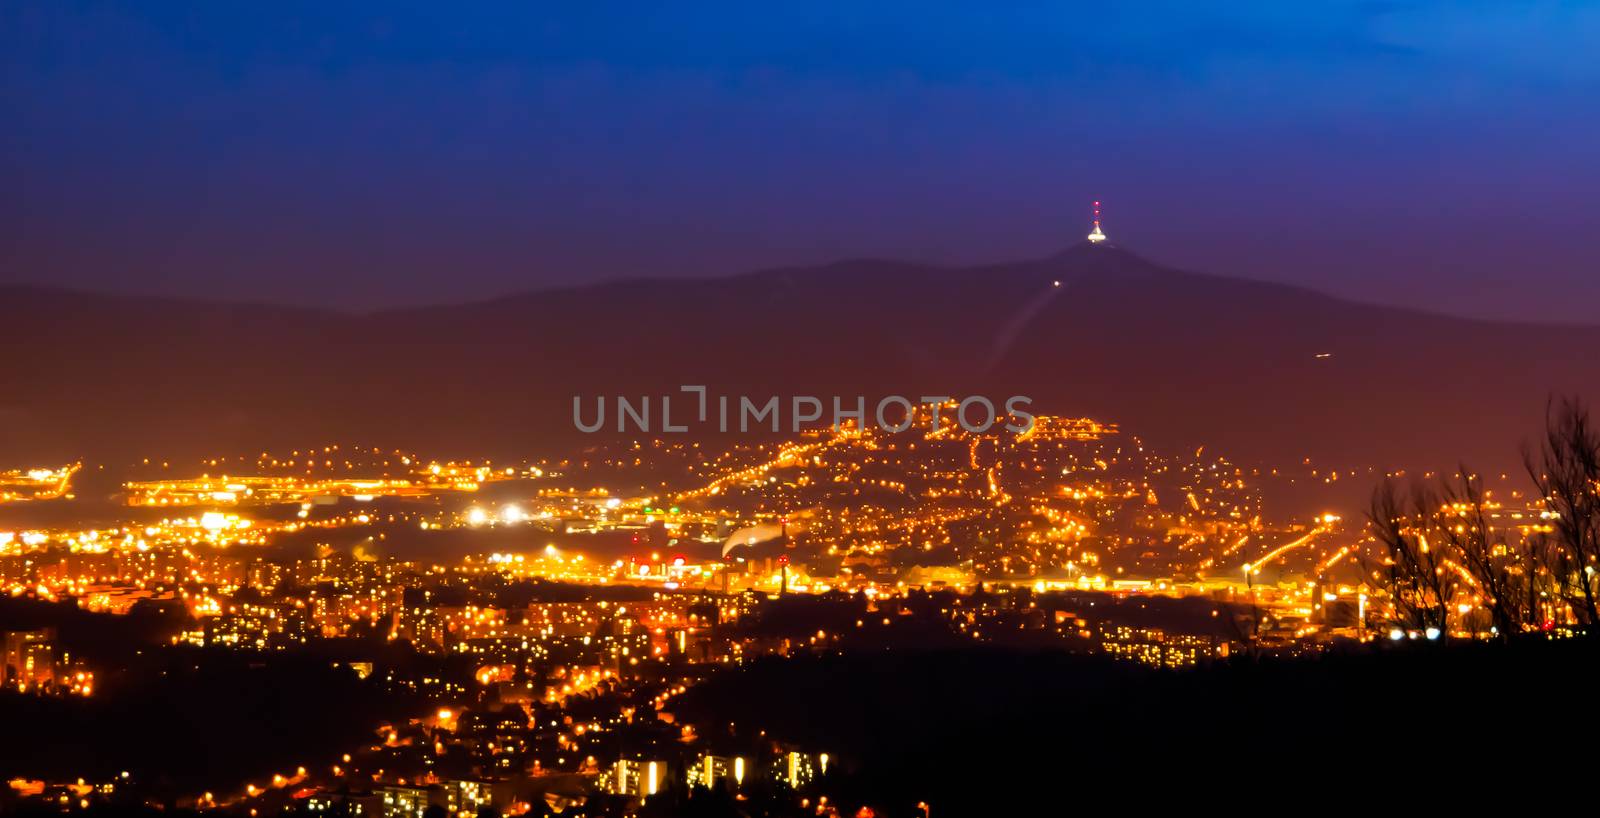 Evening view of illuminated Liberec city and Jested Mountain. Night scene by pyty